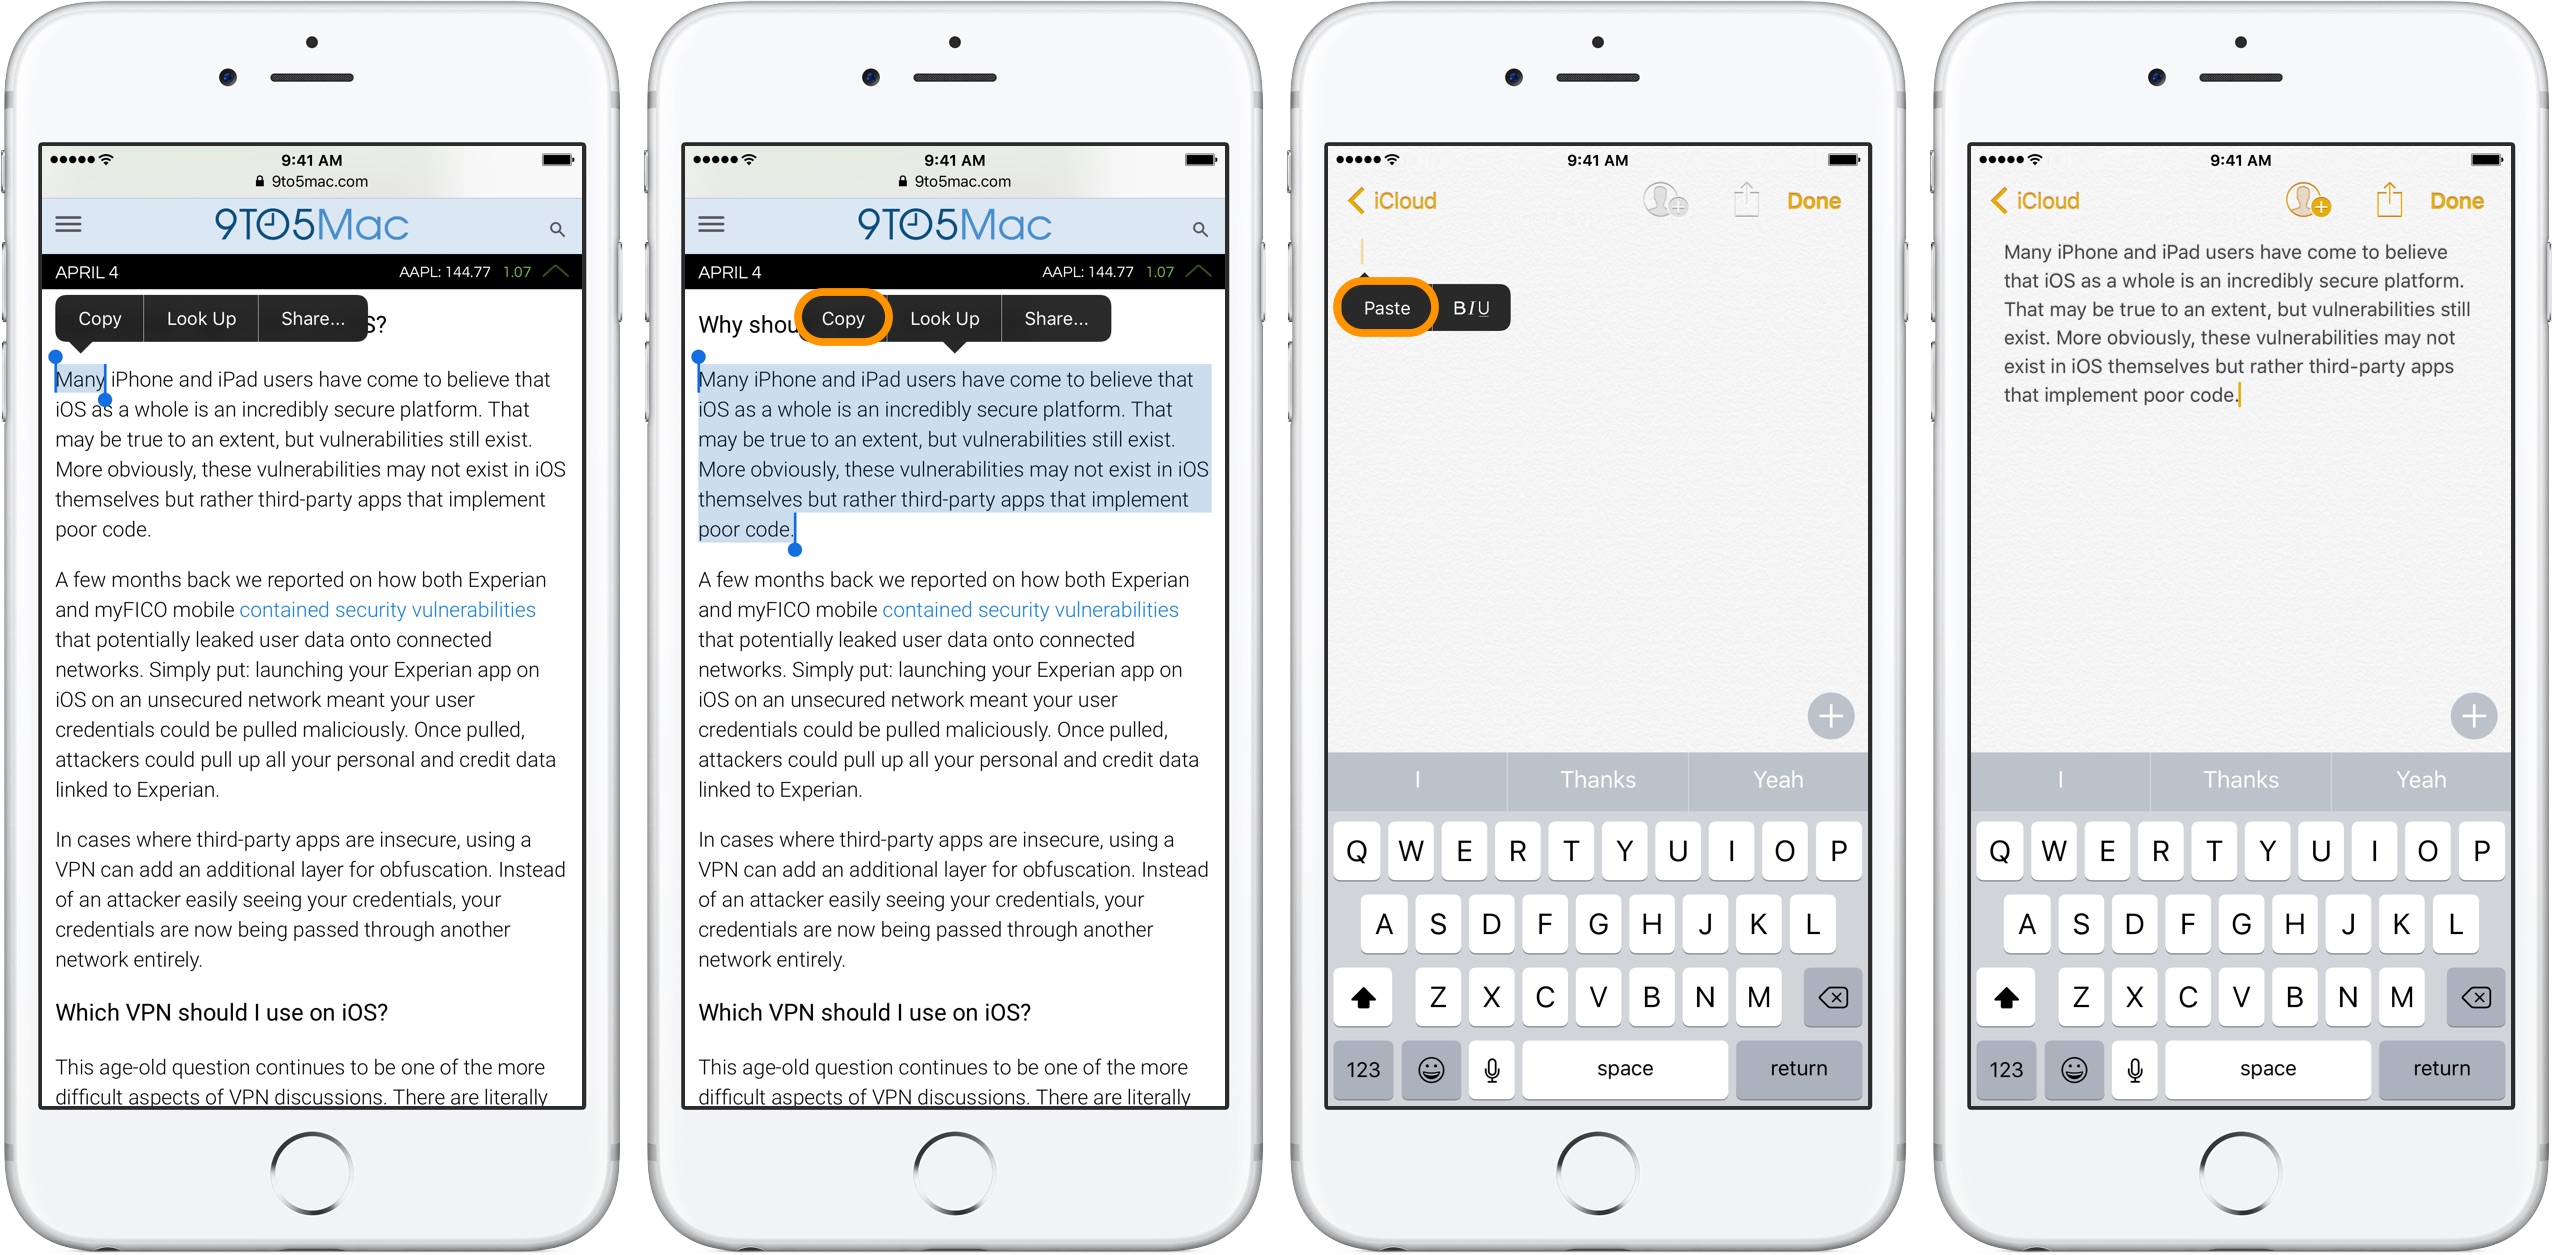 Image showing copy and paste on iPhone, selecting text from a webpage and pasting into a note